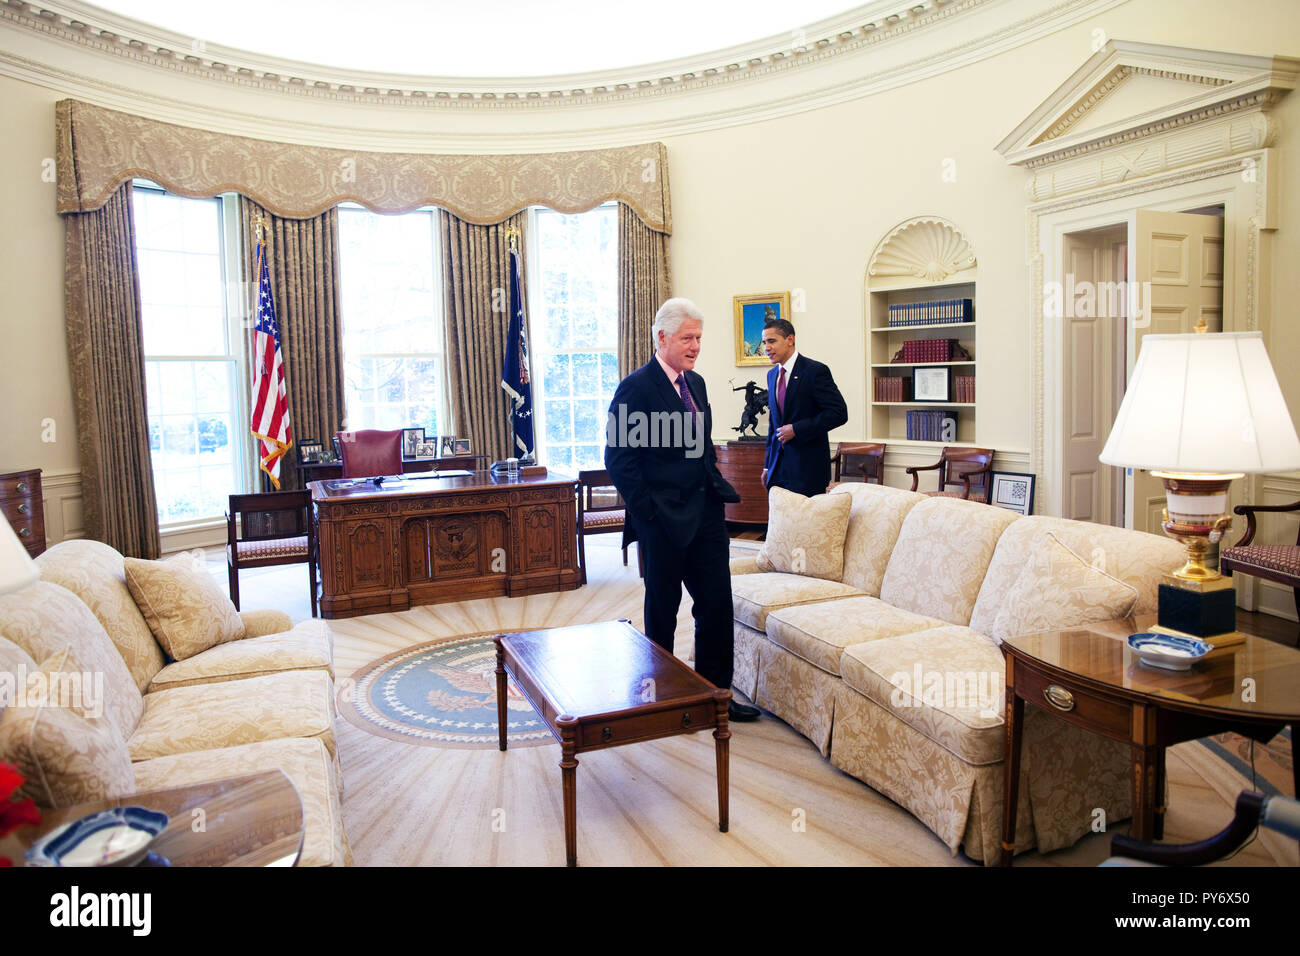 President Barack Obama meets with President Clinton in the Oval Office 4/21/09 Official White House Photo by Pete Souza Stock Photo